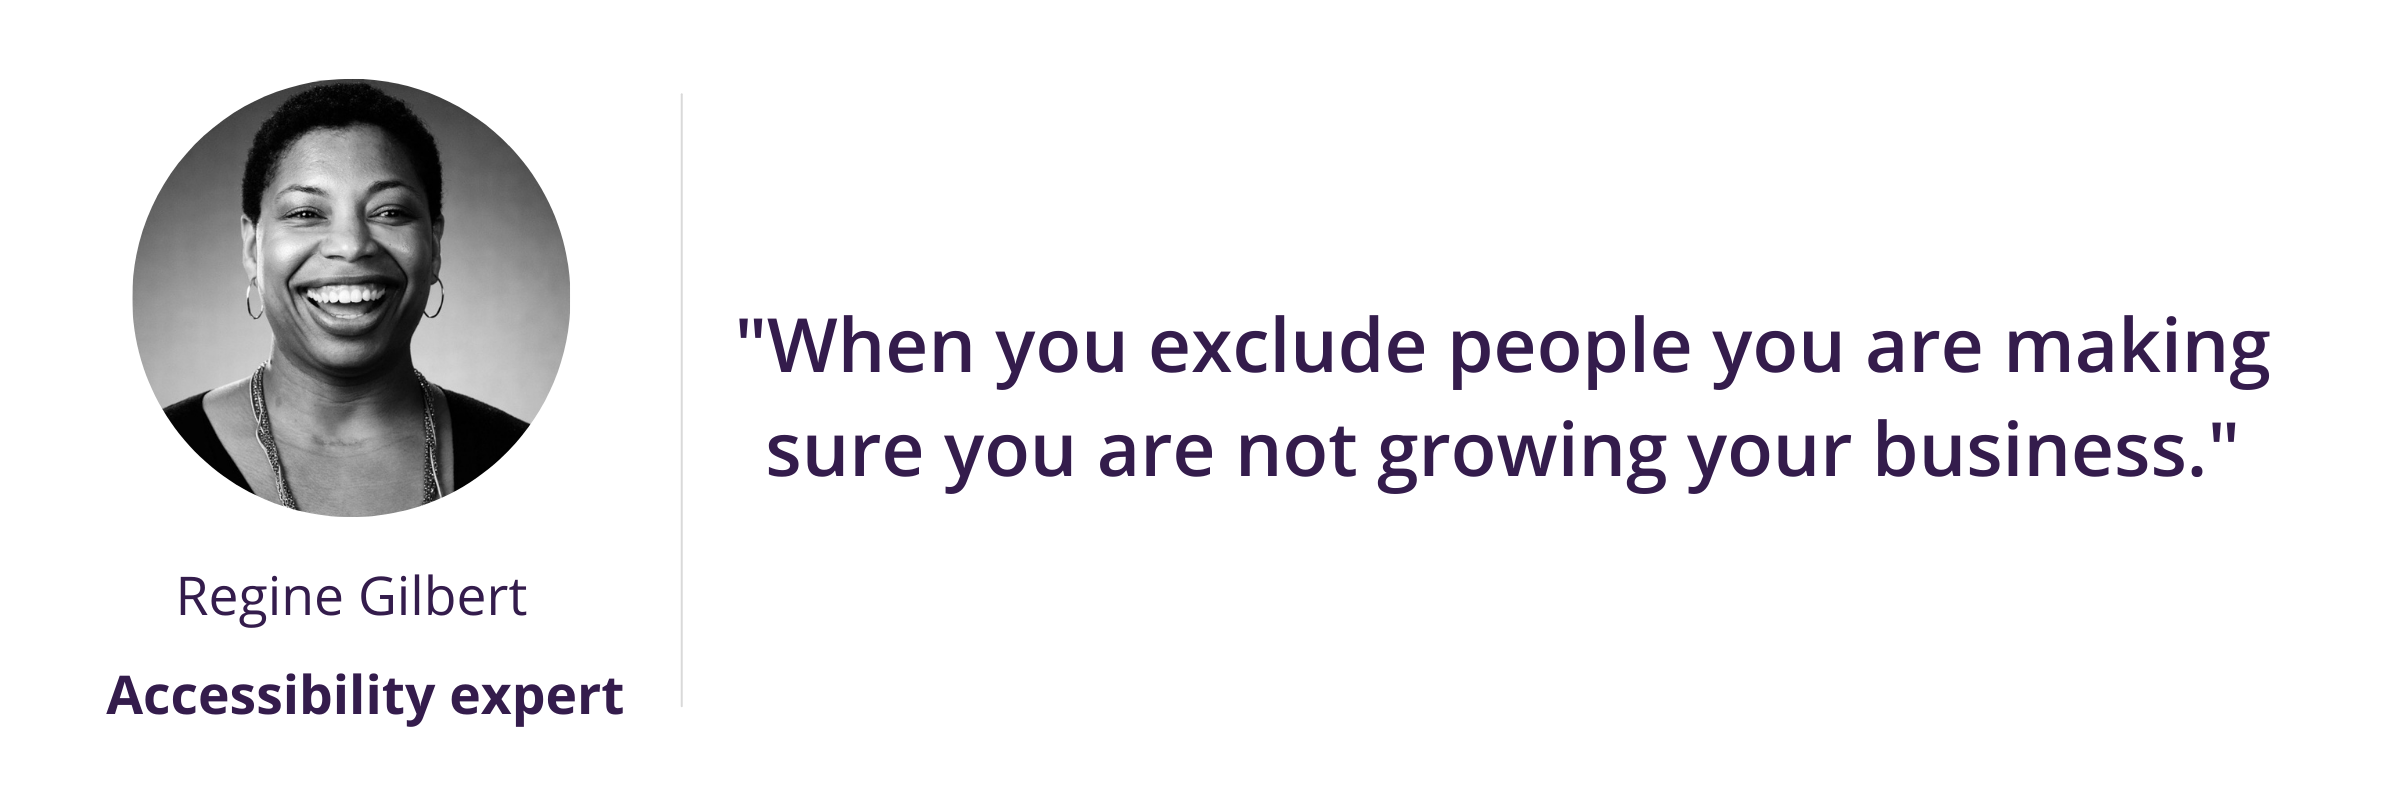 "When you exclude people you are making sure you are not growing your business."